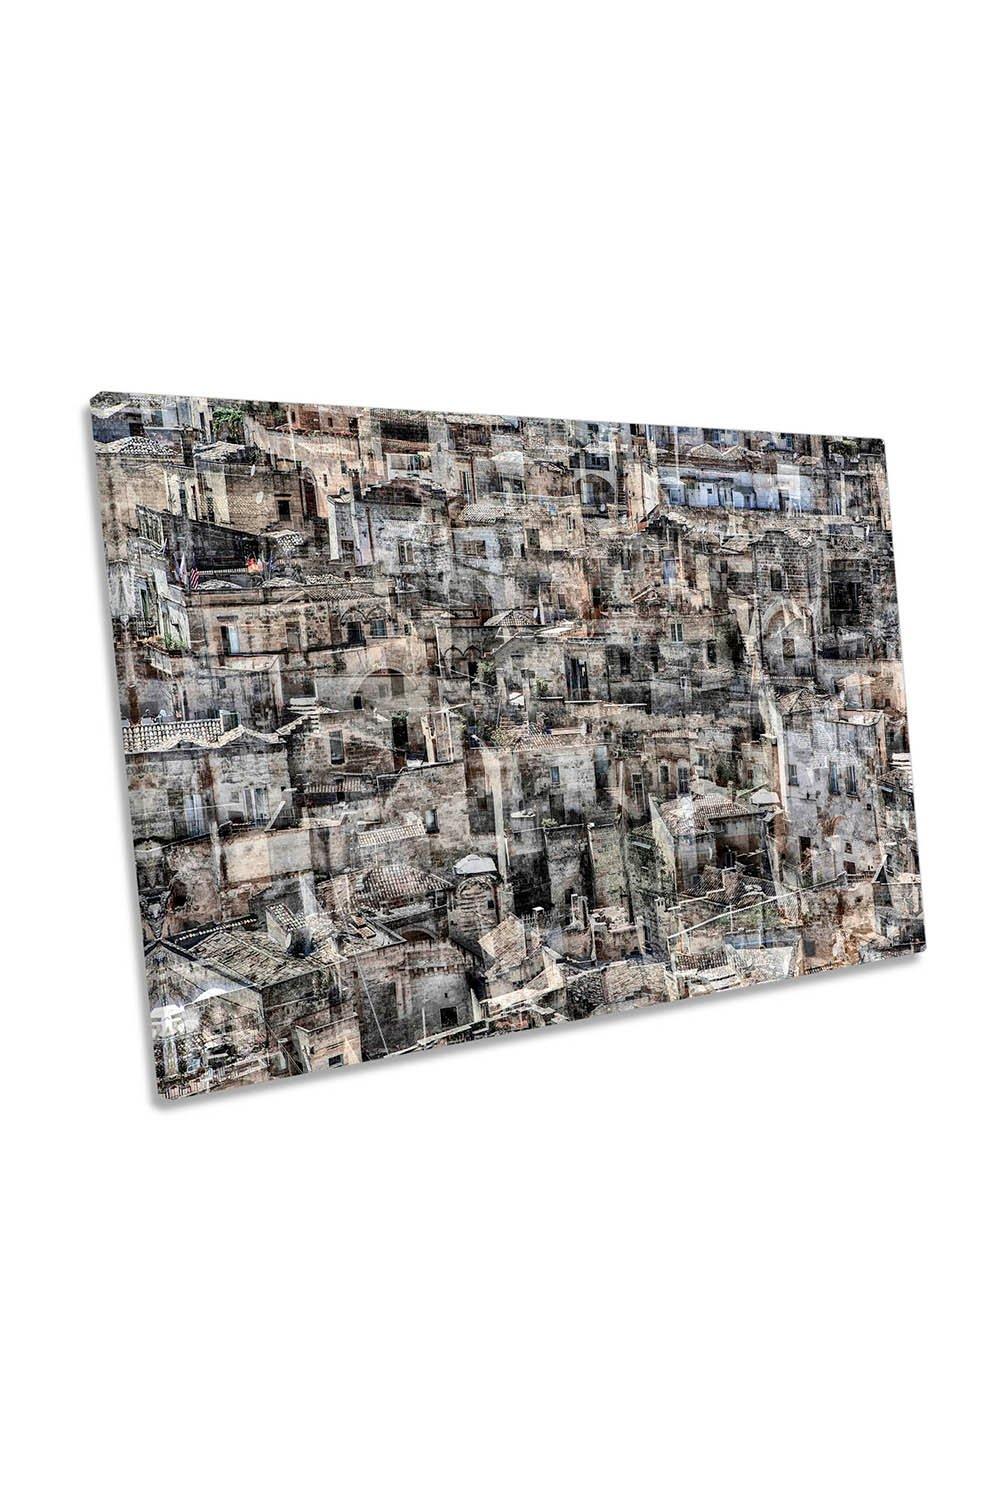 Matera Rural Village Italy Abstract Canvas Wall Art Picture Print